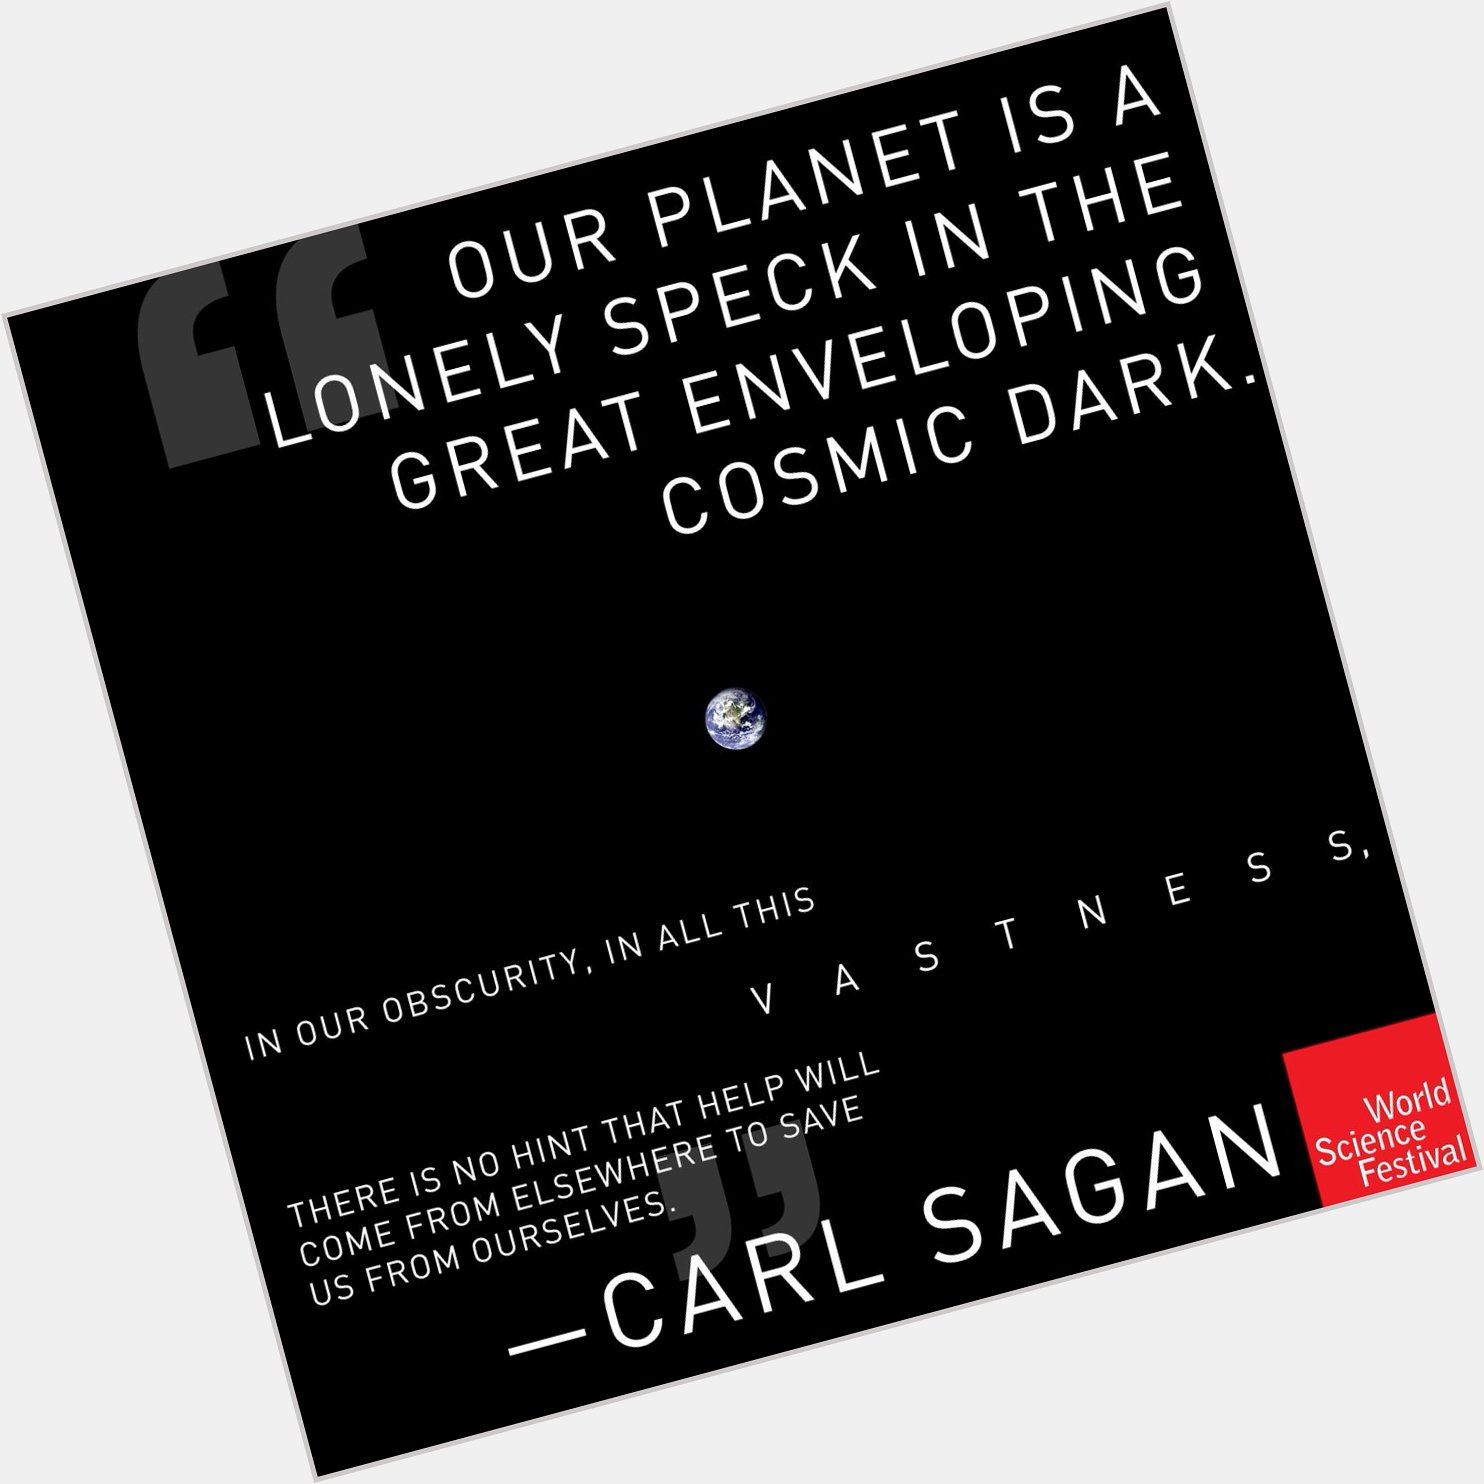 Happy birthday, Carl Sagan! His words from 1972 opened the Alien Life program this year:  